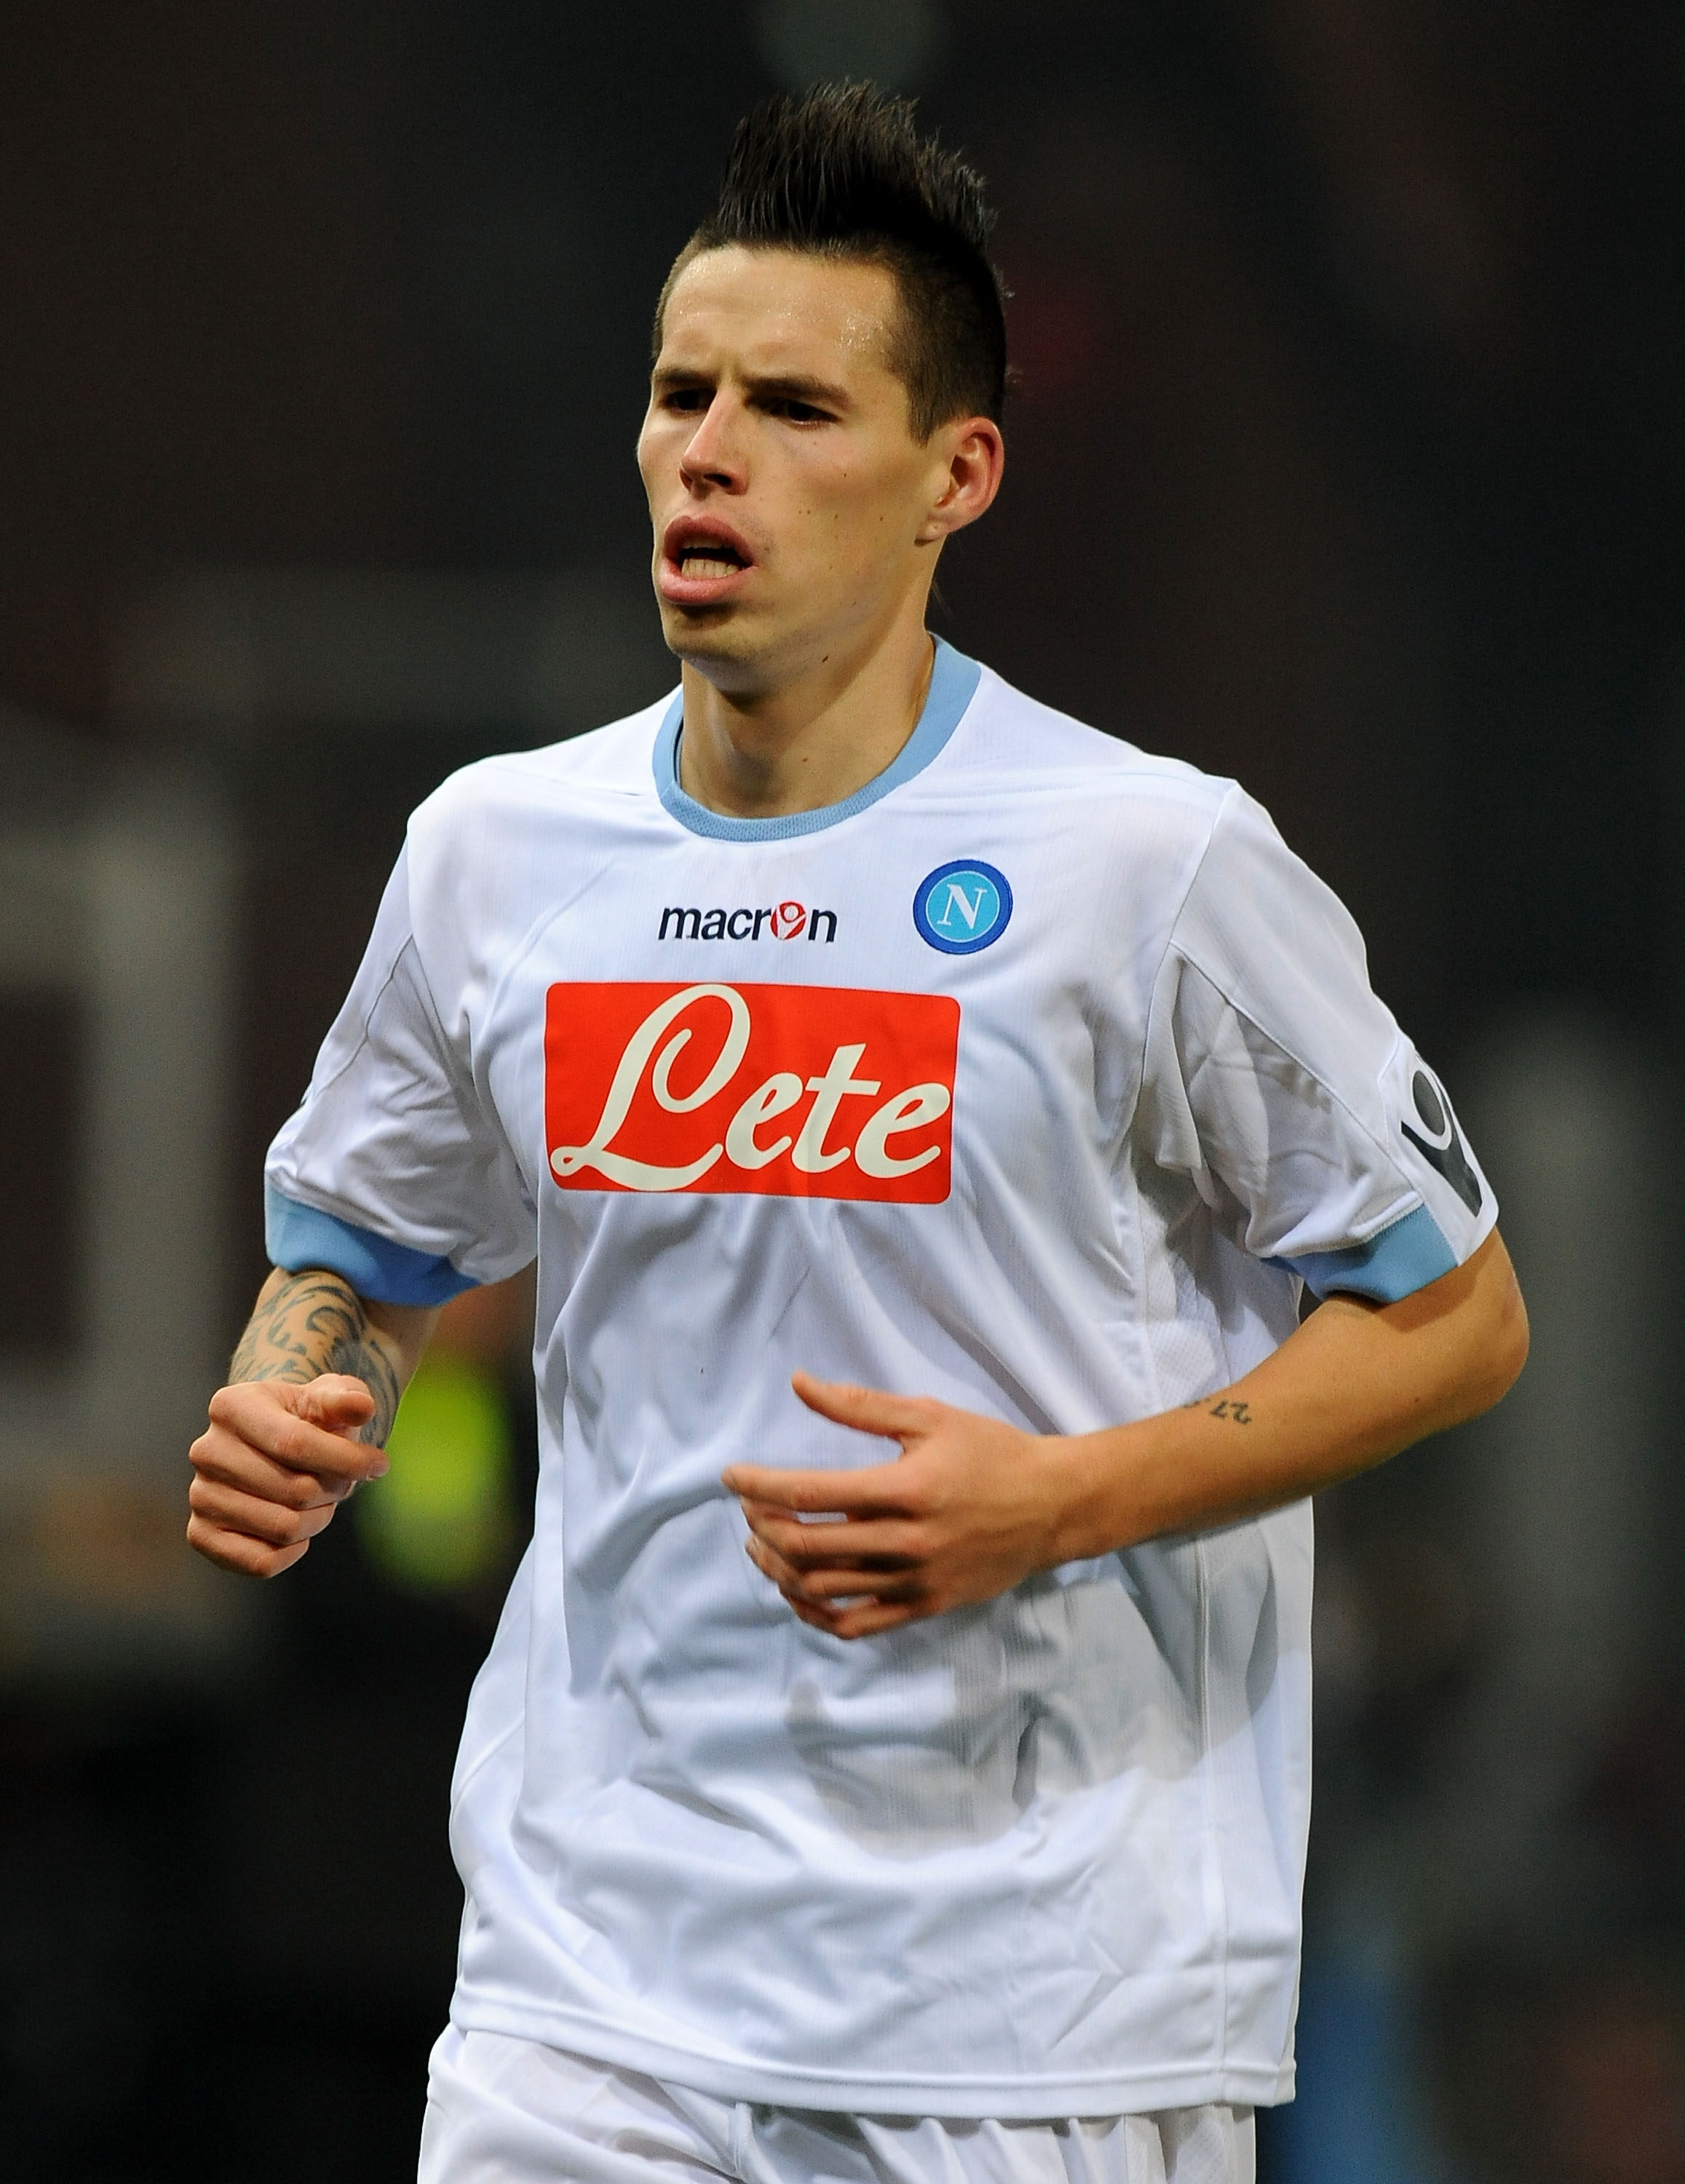 GENOA, ITALY - DECEMBER 11:  Marek Hamsik of SSC Napoli in action during the Serie A match between Genoa CFC and SSC Napoli at Stadio Luigi Ferraris on December 11, 2010 in Genoa, Italy. (Photo by Massimo Cebrelli/Getty Images)